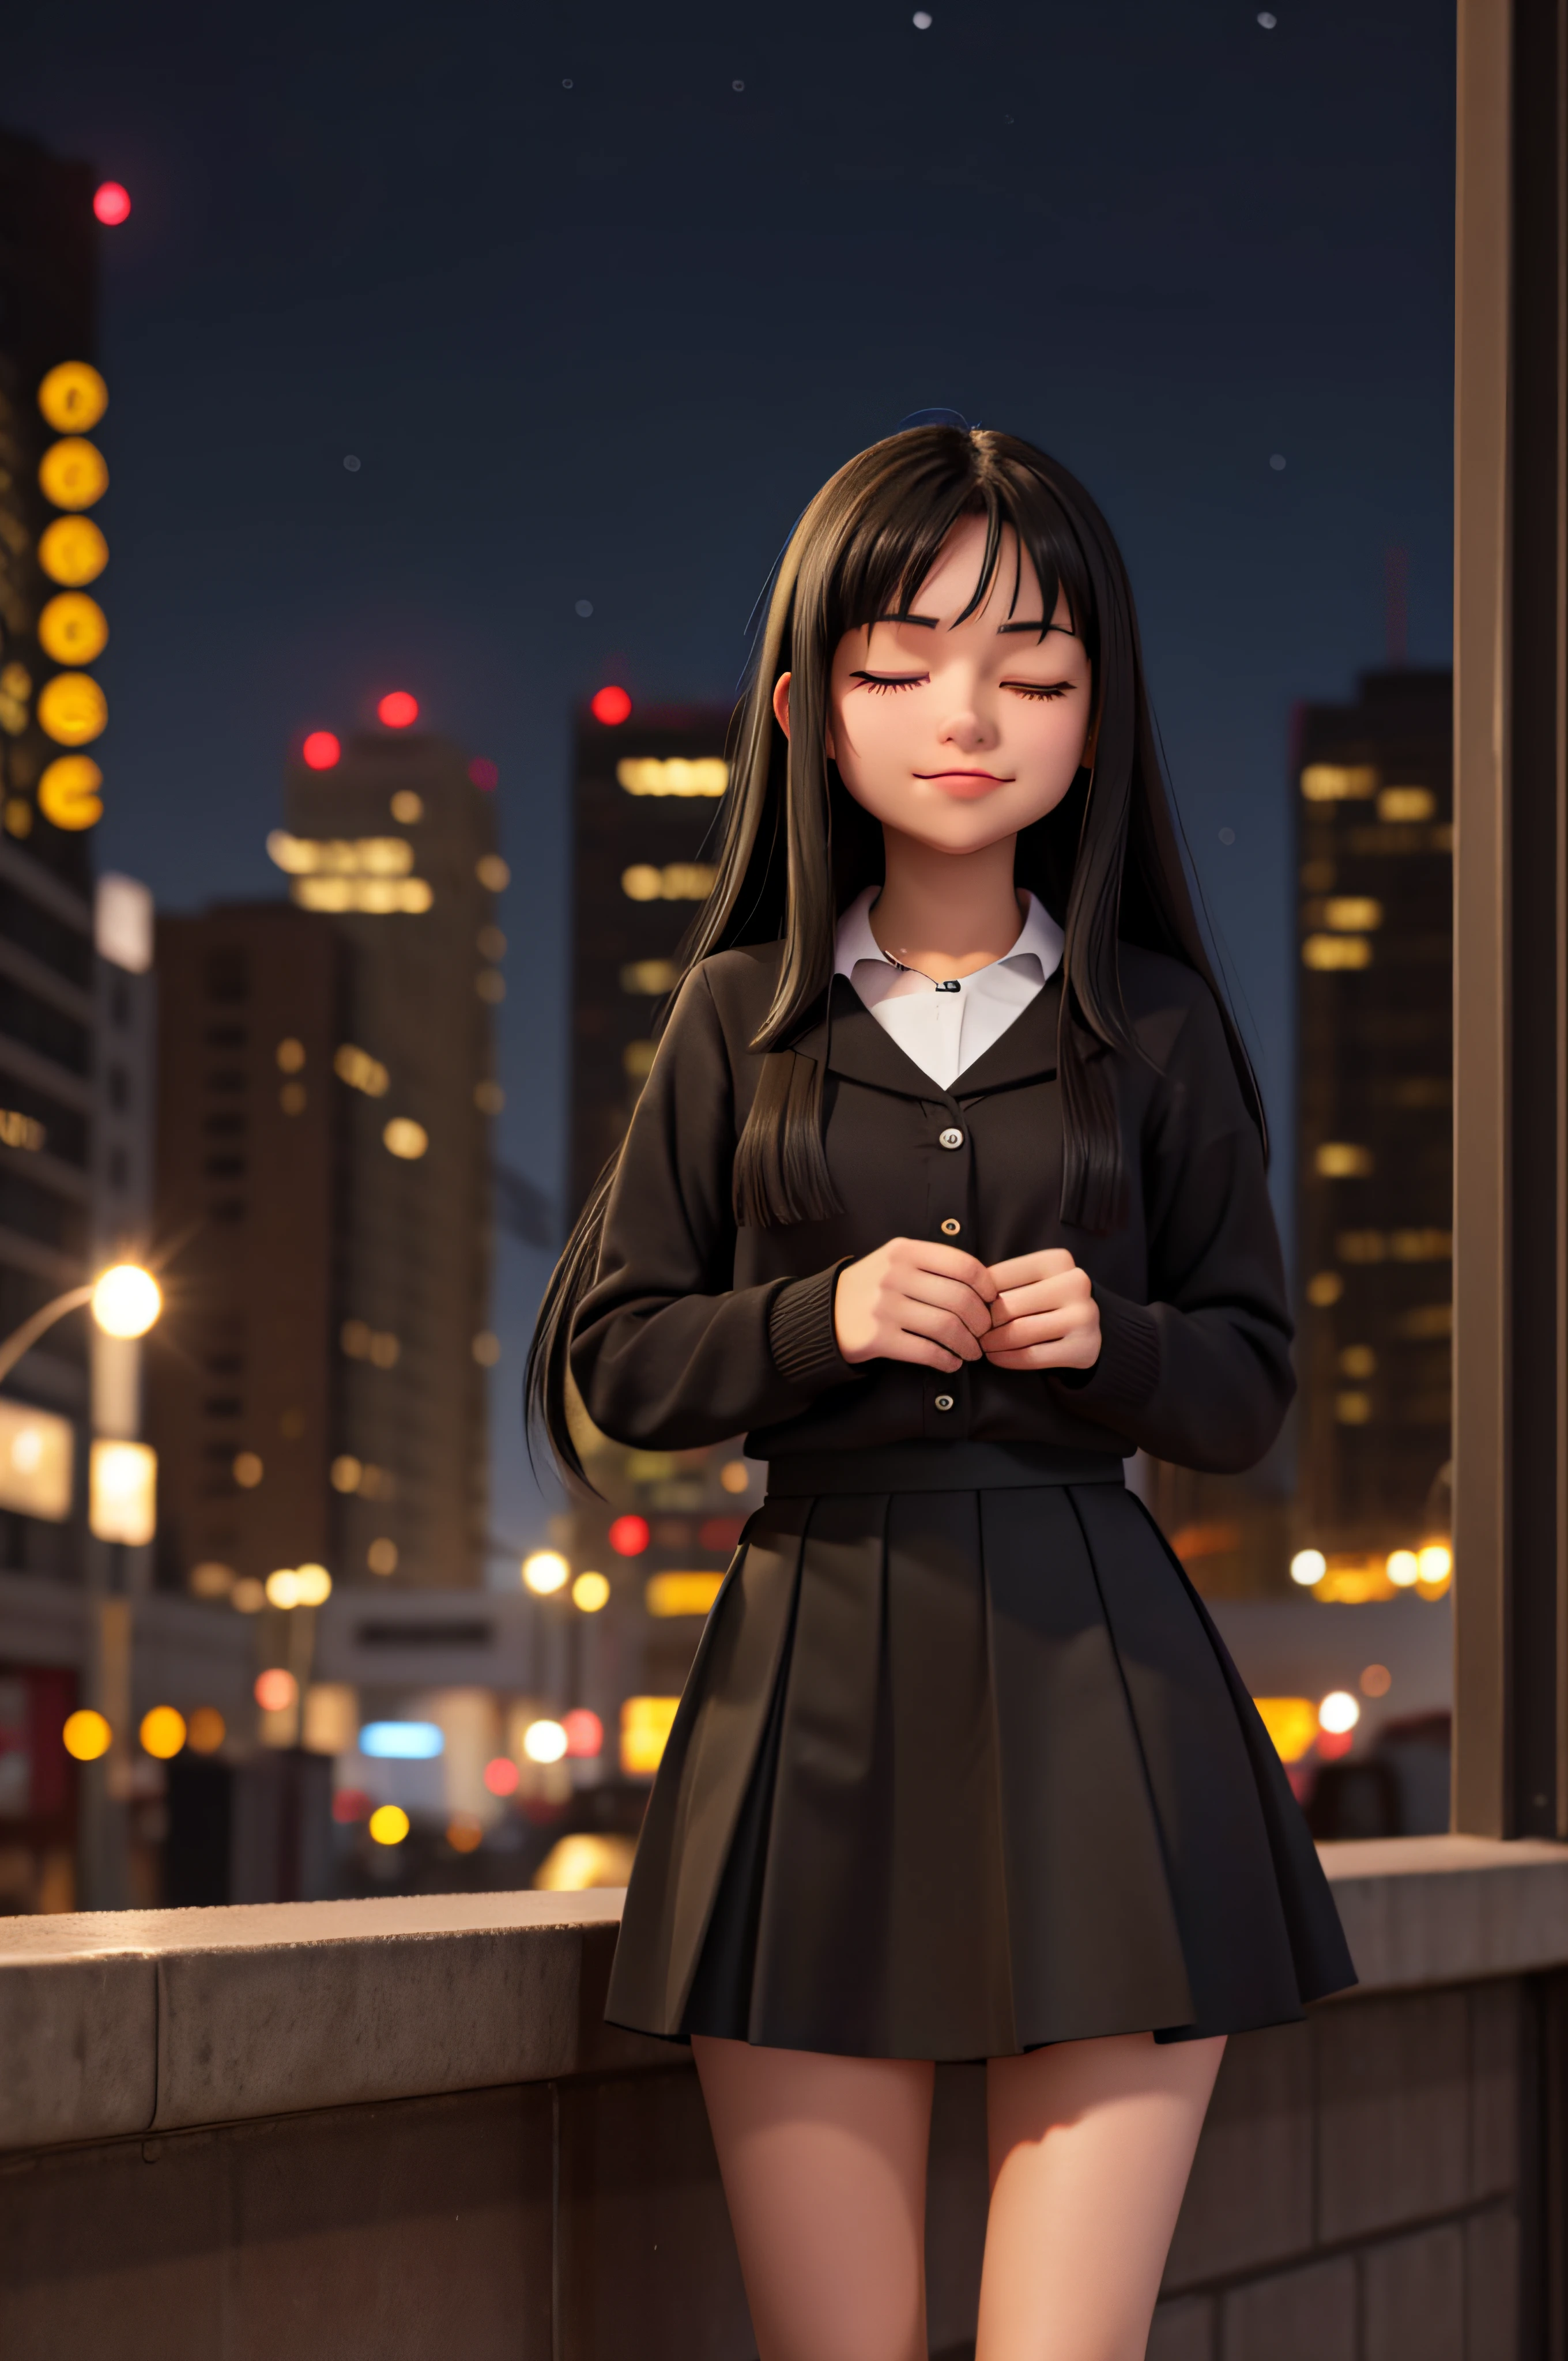 1 girl, 18 years old, long black hair, sticking out her tongue, eyes closed, night city, black skirt